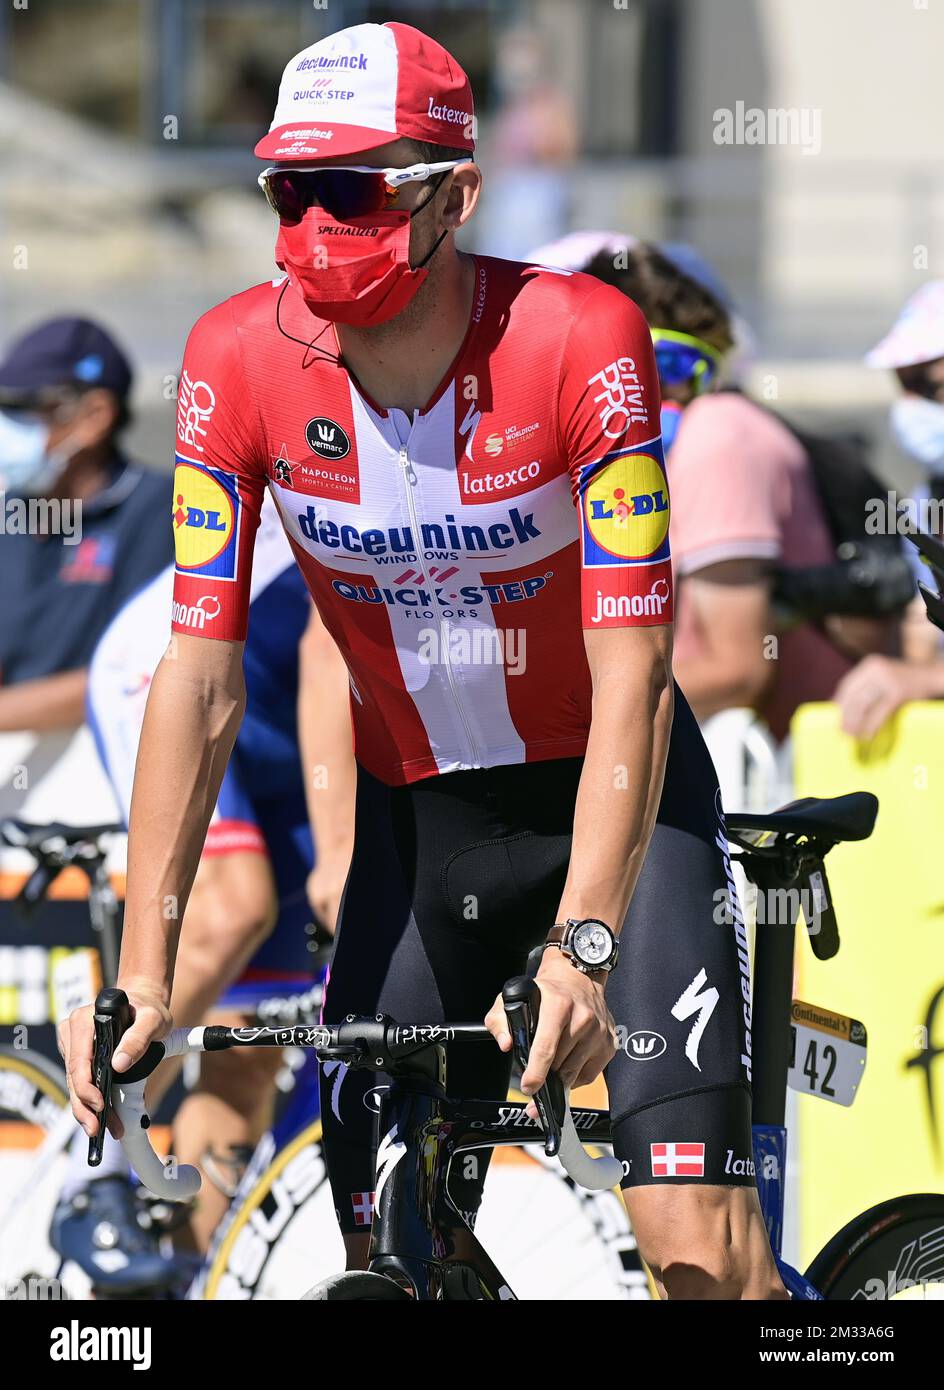 Kasper Asgreen of Deceuninck - Quick - Step pictured at the start of the ninth stage of the 107th edition of the Tour de France cycling race from Ile d'Oleron Le Chateau-d'Oleron to Ile de Re Saint-Martin-de-Re (168,5km), in France, Tuesday 08 September 2020. This year's Tour de France was postponed due to the worldwide Covid-19 pandemic. The 2020 race starts in Nice on Saturday 29 August and ends on 20 September. BELGA PHOTO POOL PETER DE VOECHT Stock Photo